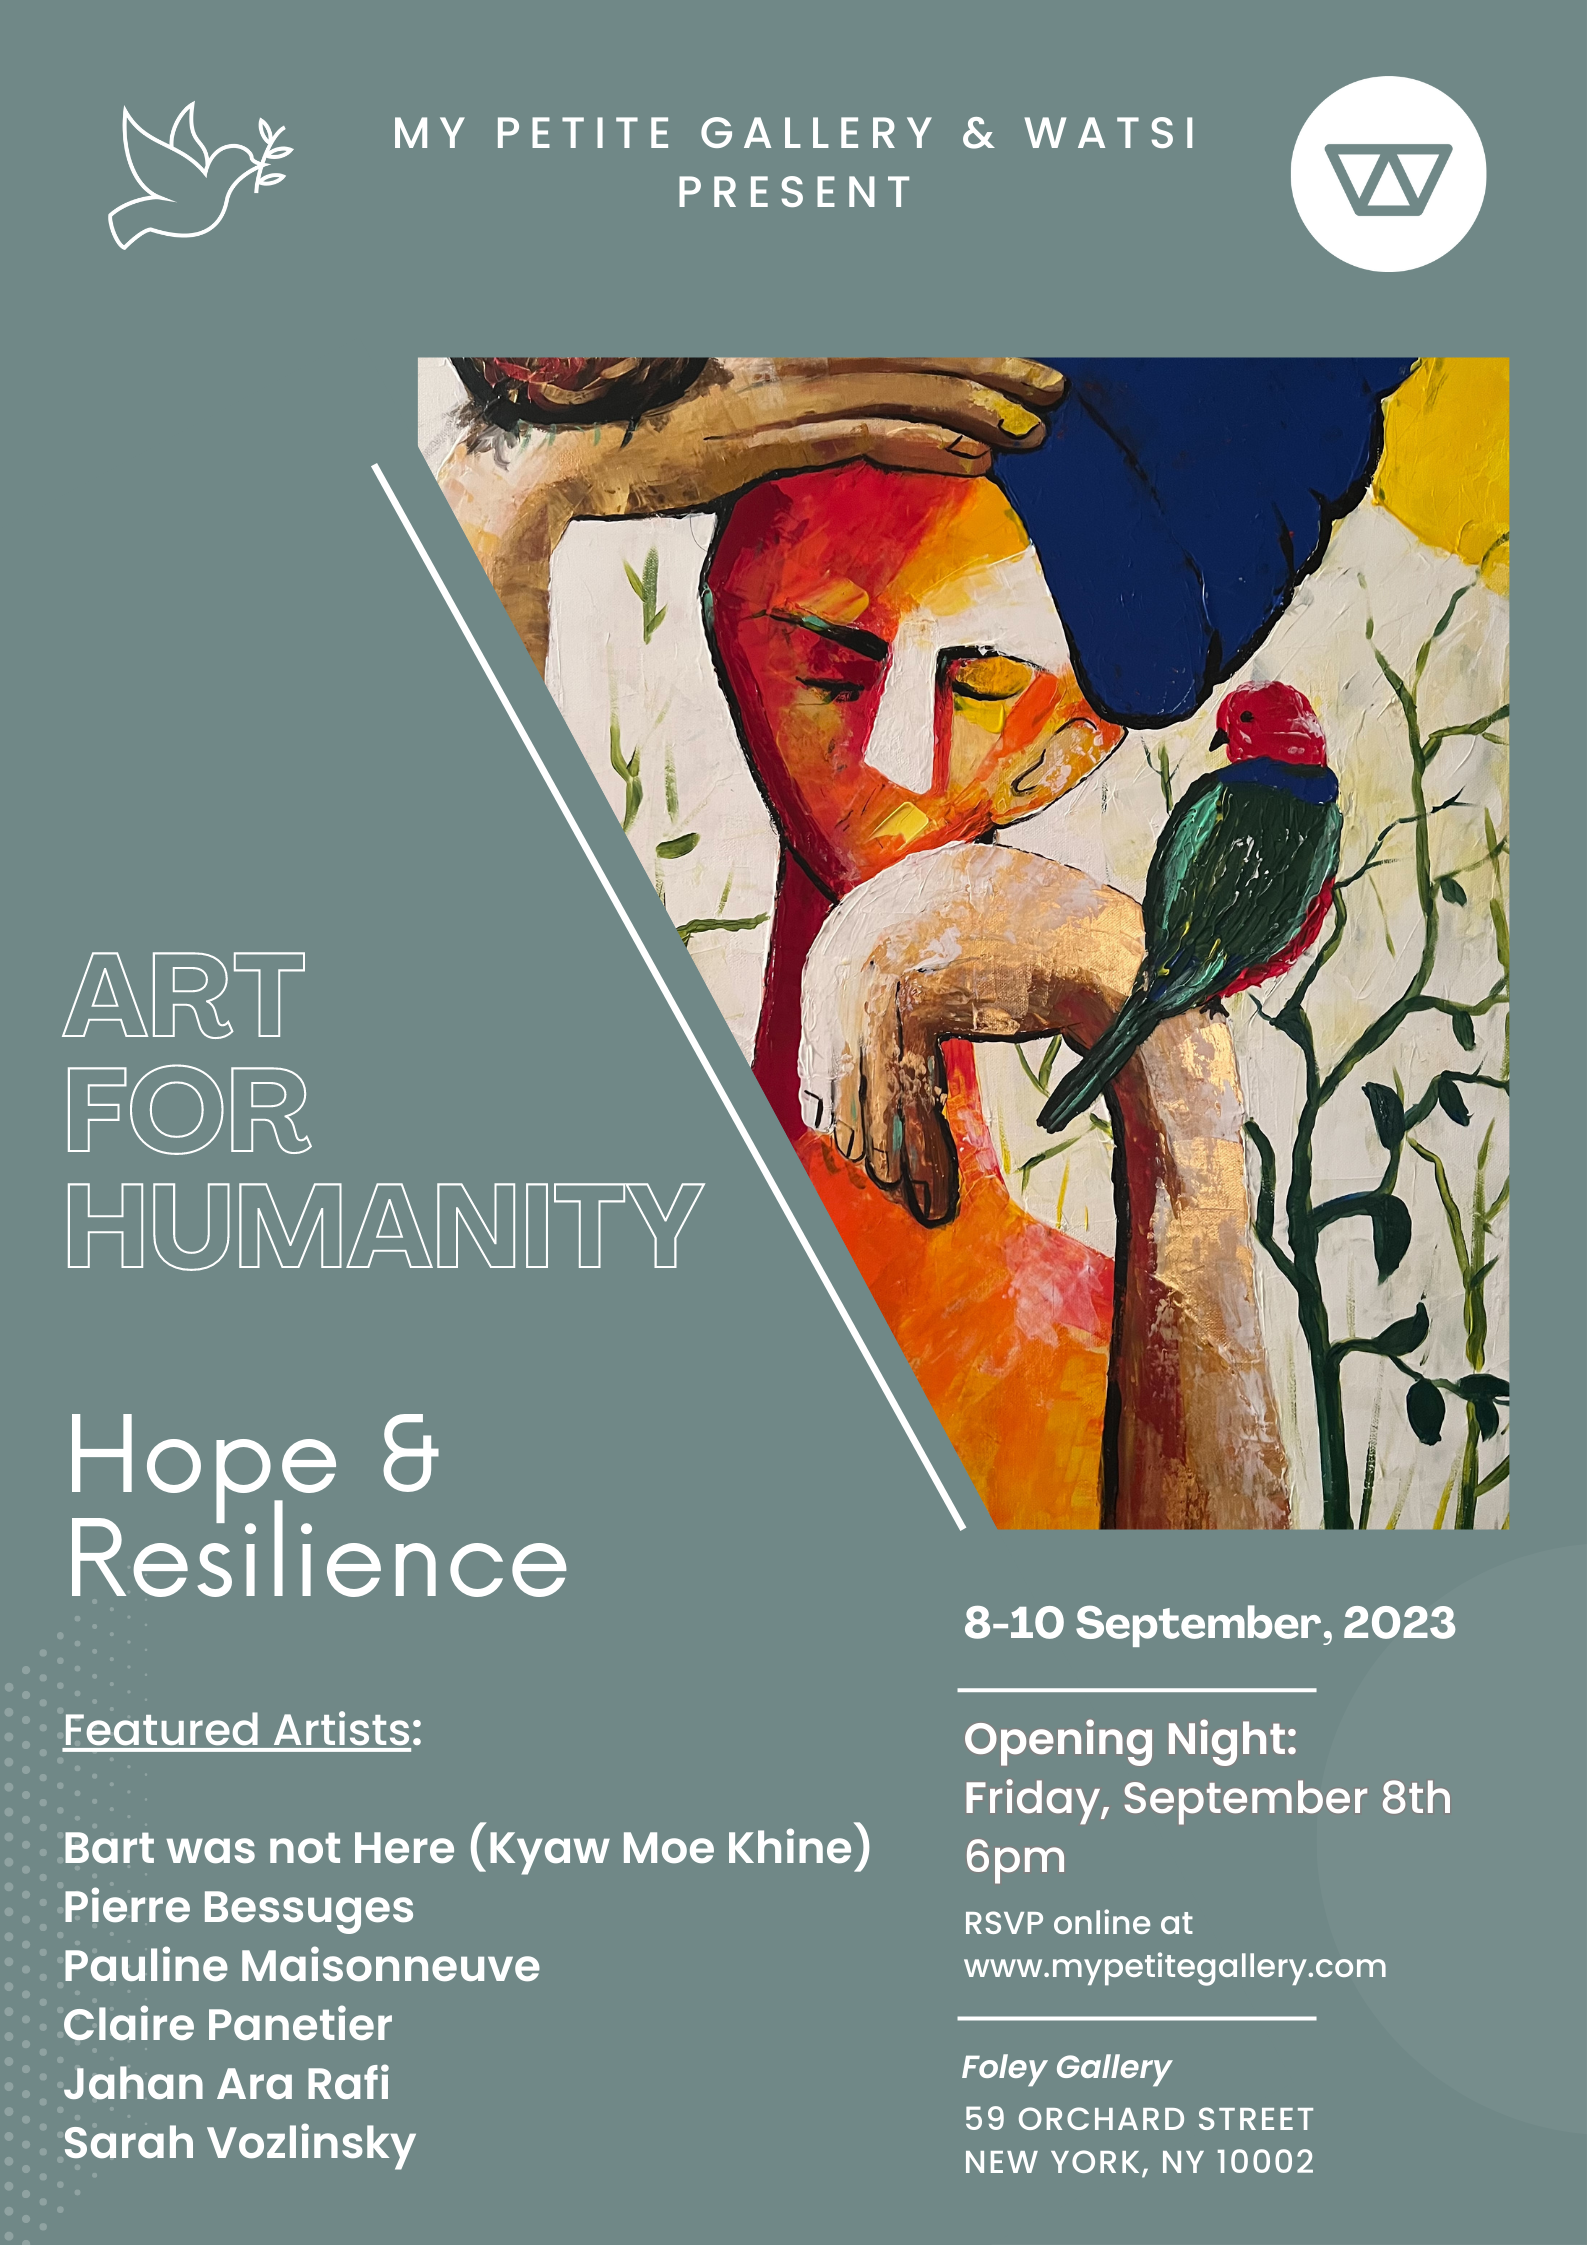 Poster of My Petite's Gallery Art for Humanity event in New York on September 8th, 2023